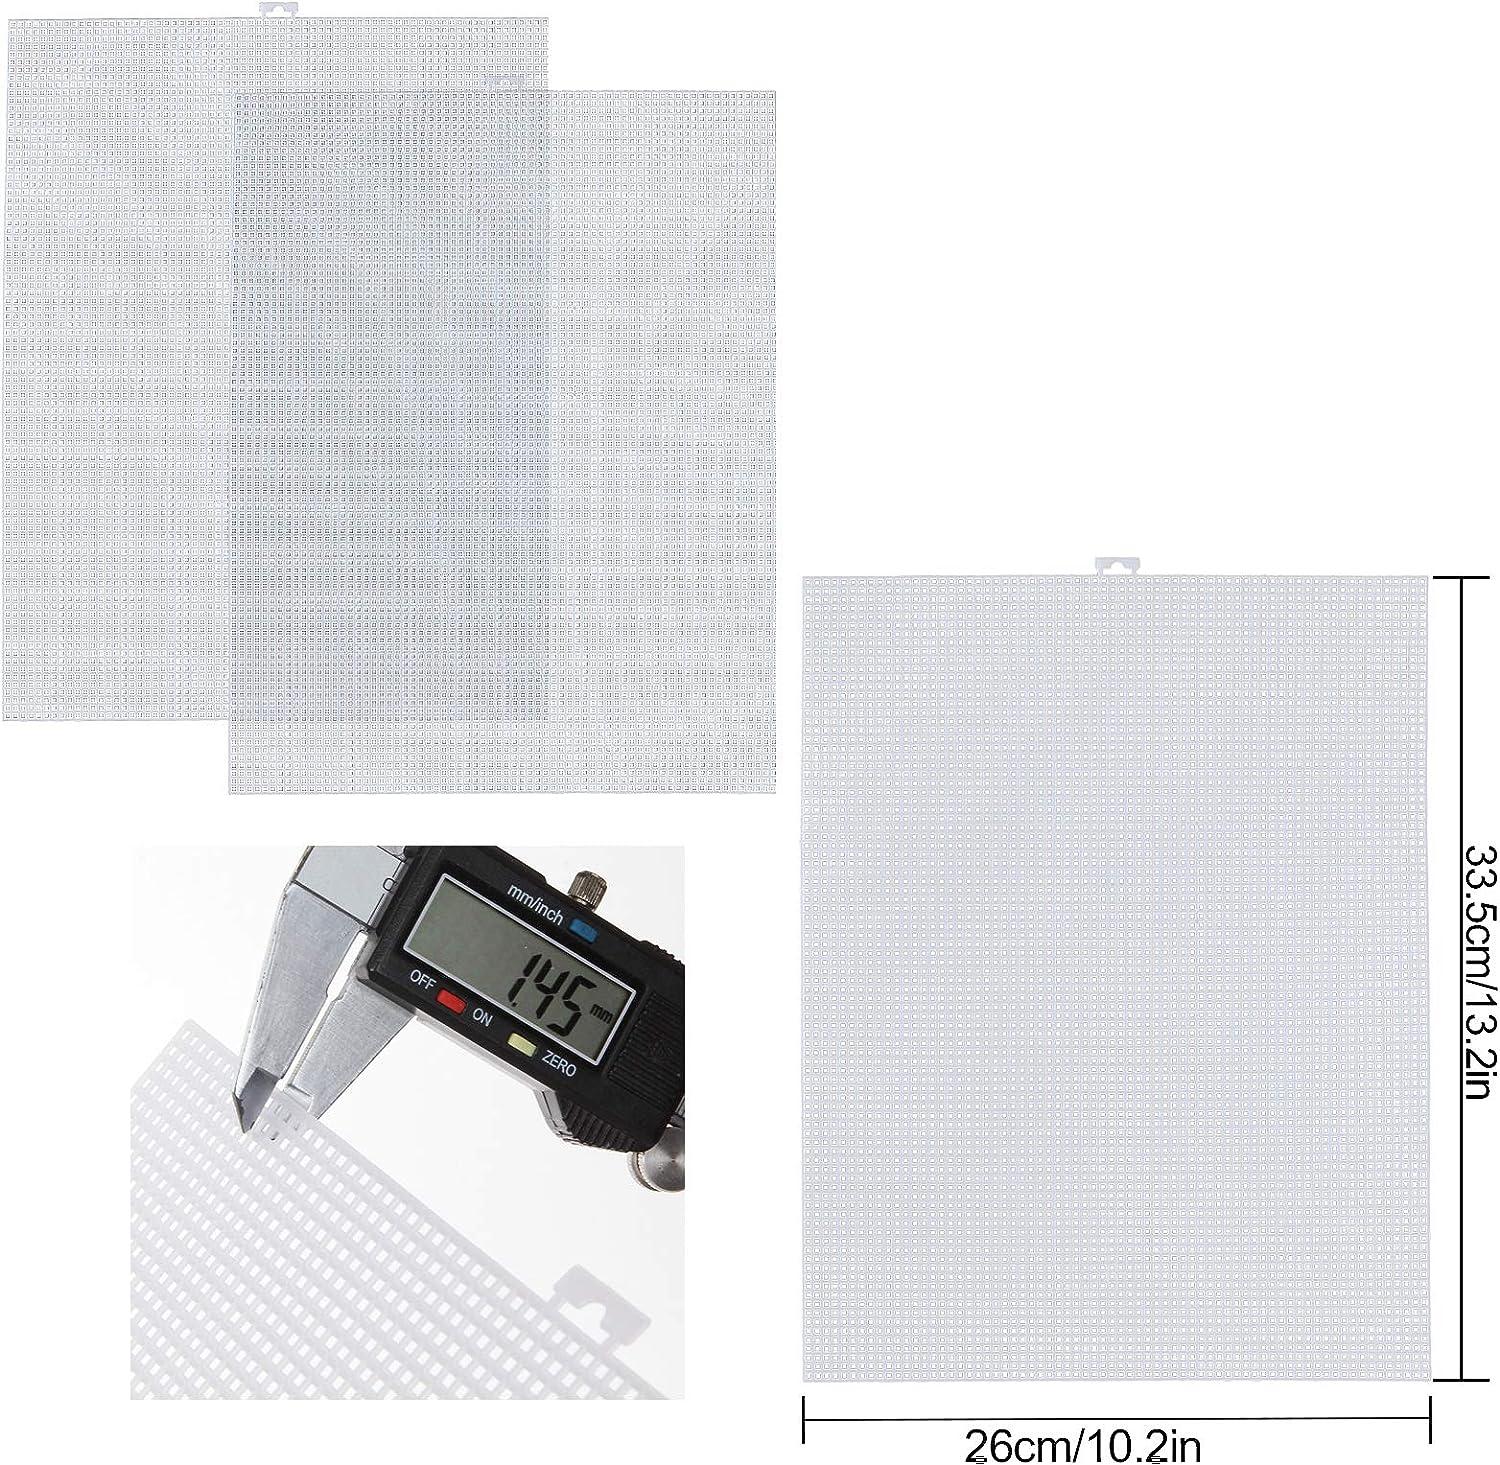 30 Pieces Plastic Mesh Canvas Sheets For Embroidery, Acrylic Yarn